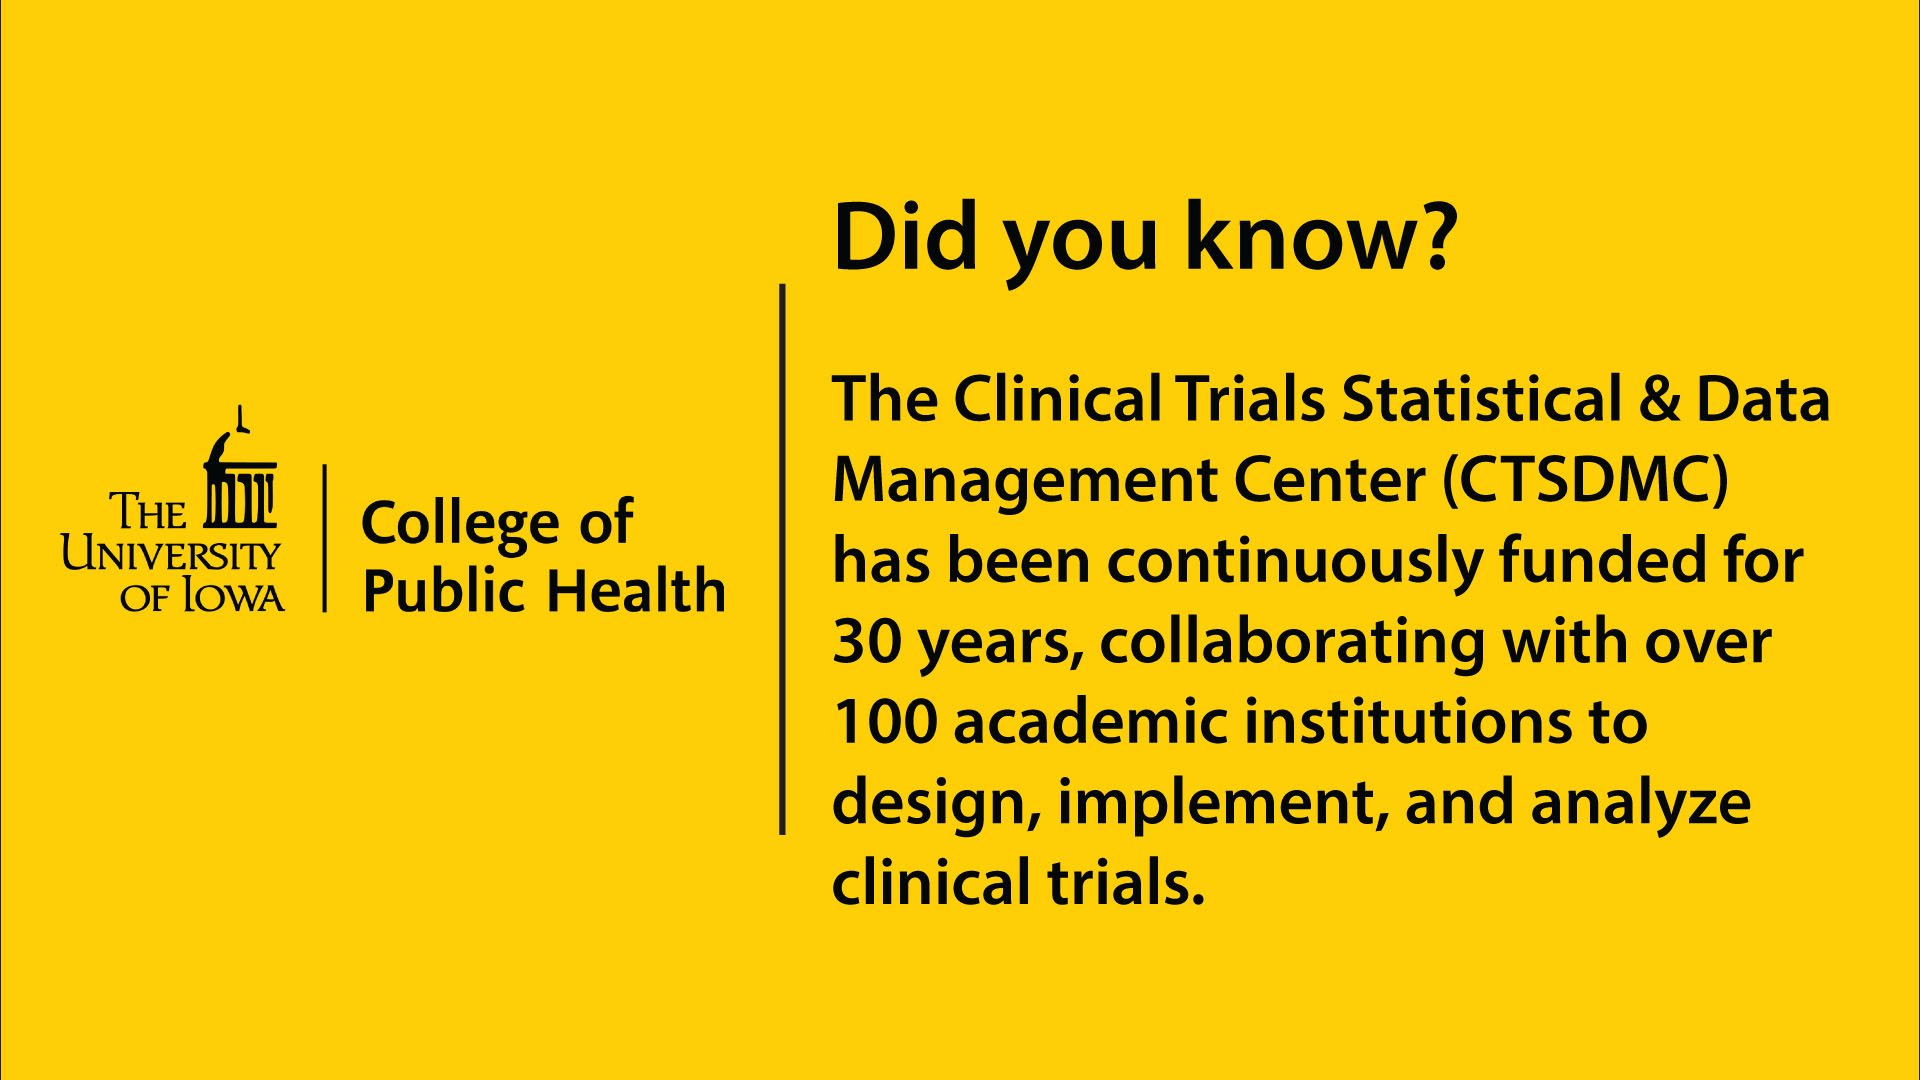 Did you know the CTSDMC has been continuously funded for 30 years?